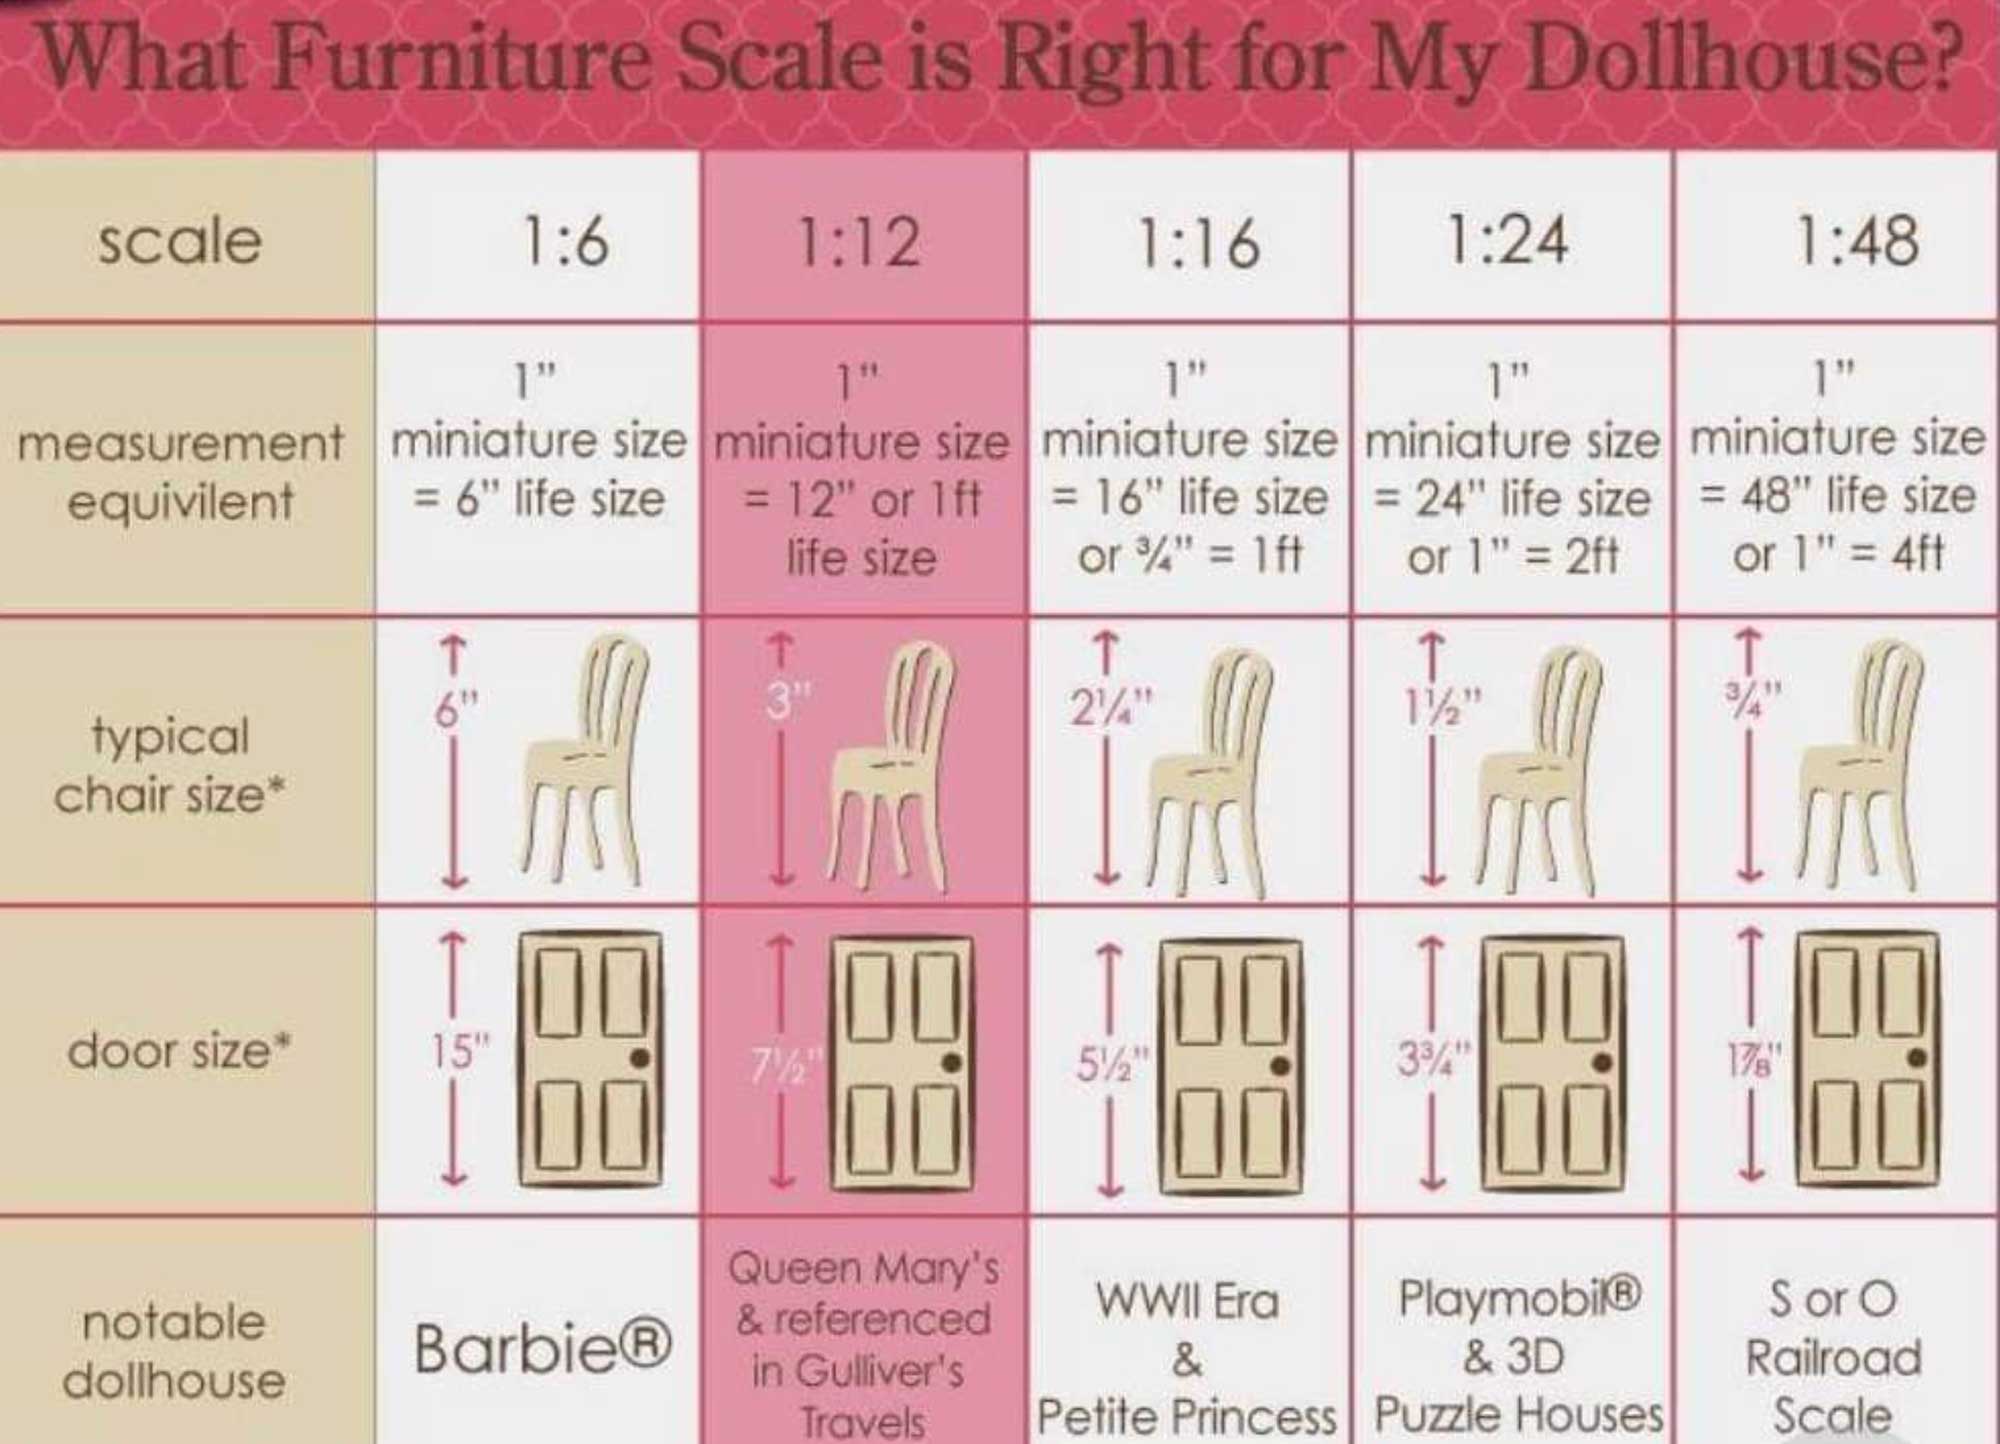 Furniture Scale for dollhouse